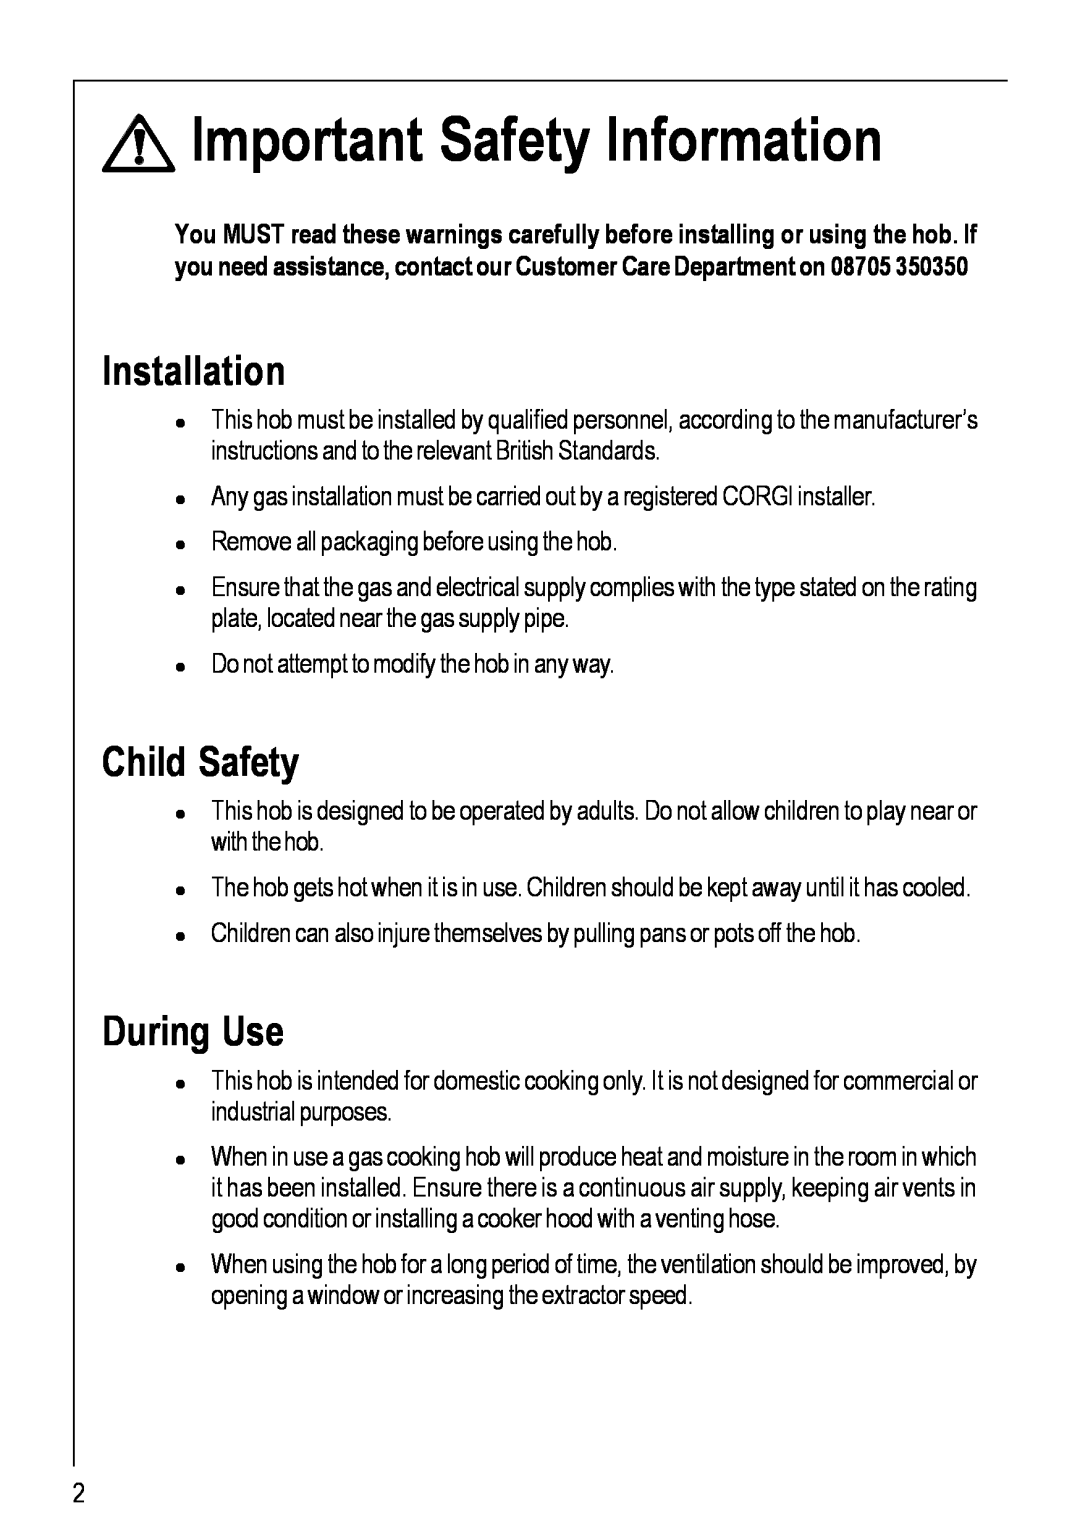 Electrolux 99852 G manual Important Safety Information, Installation, Child Safety, During Use 